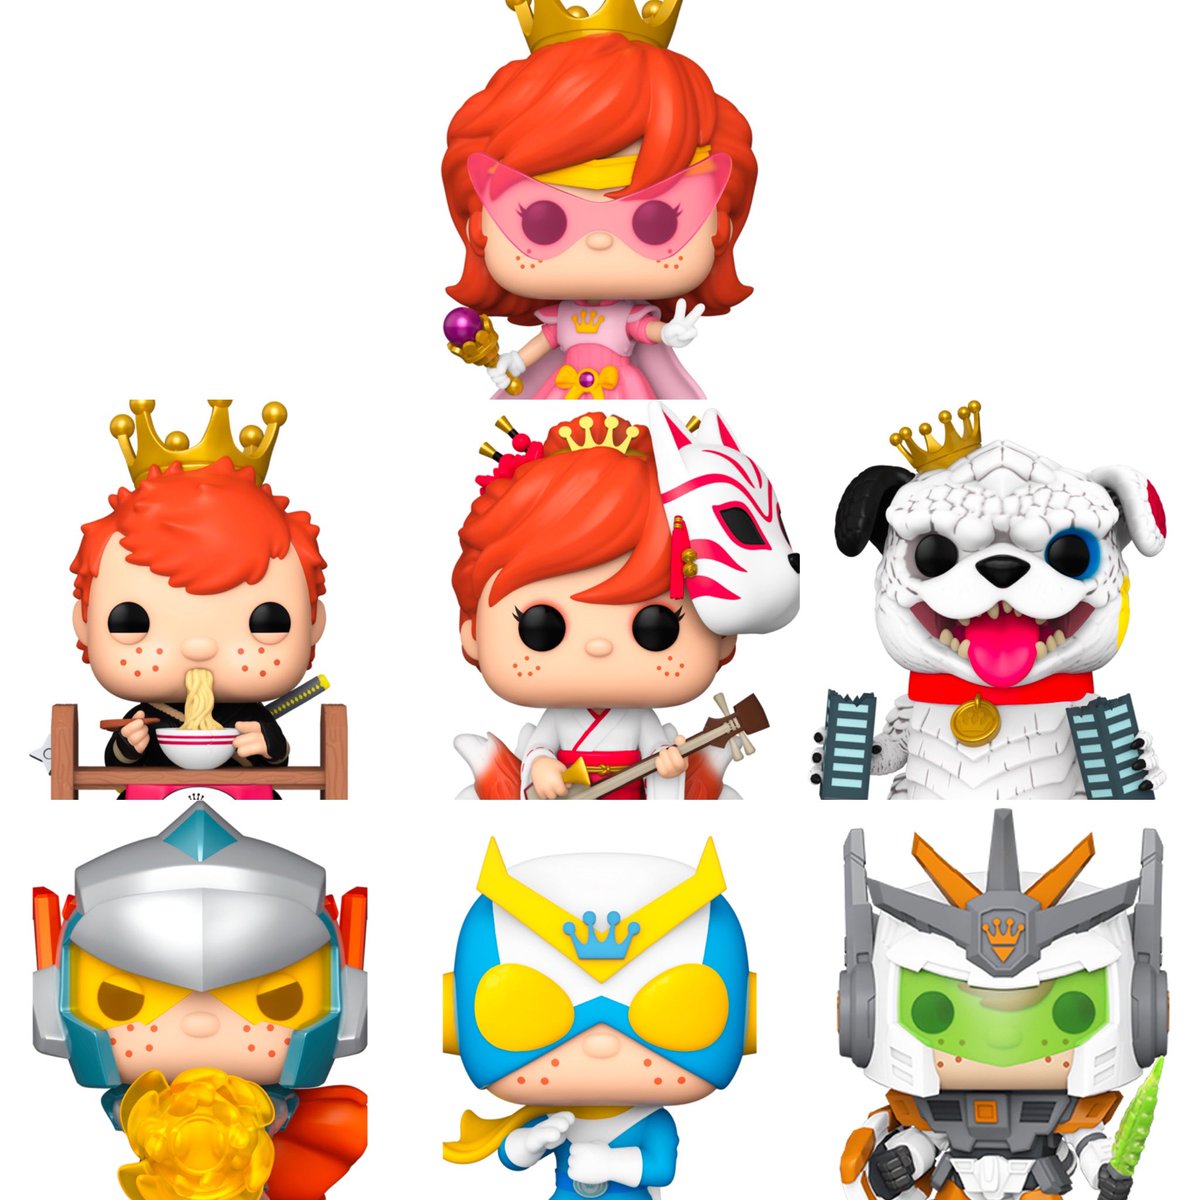 Out of box glam look at the Funime & Cosplay NFT Pops! Which one is your favorite?
Packs drop on 5/14.
.
#Funko #FunkoPop #FunkoPopVinyl #Pop #PopVinyl #Collectibles #Collectible #FunkoCollector #FunkoPops #Collector #Toy #Toys #DisTrackers